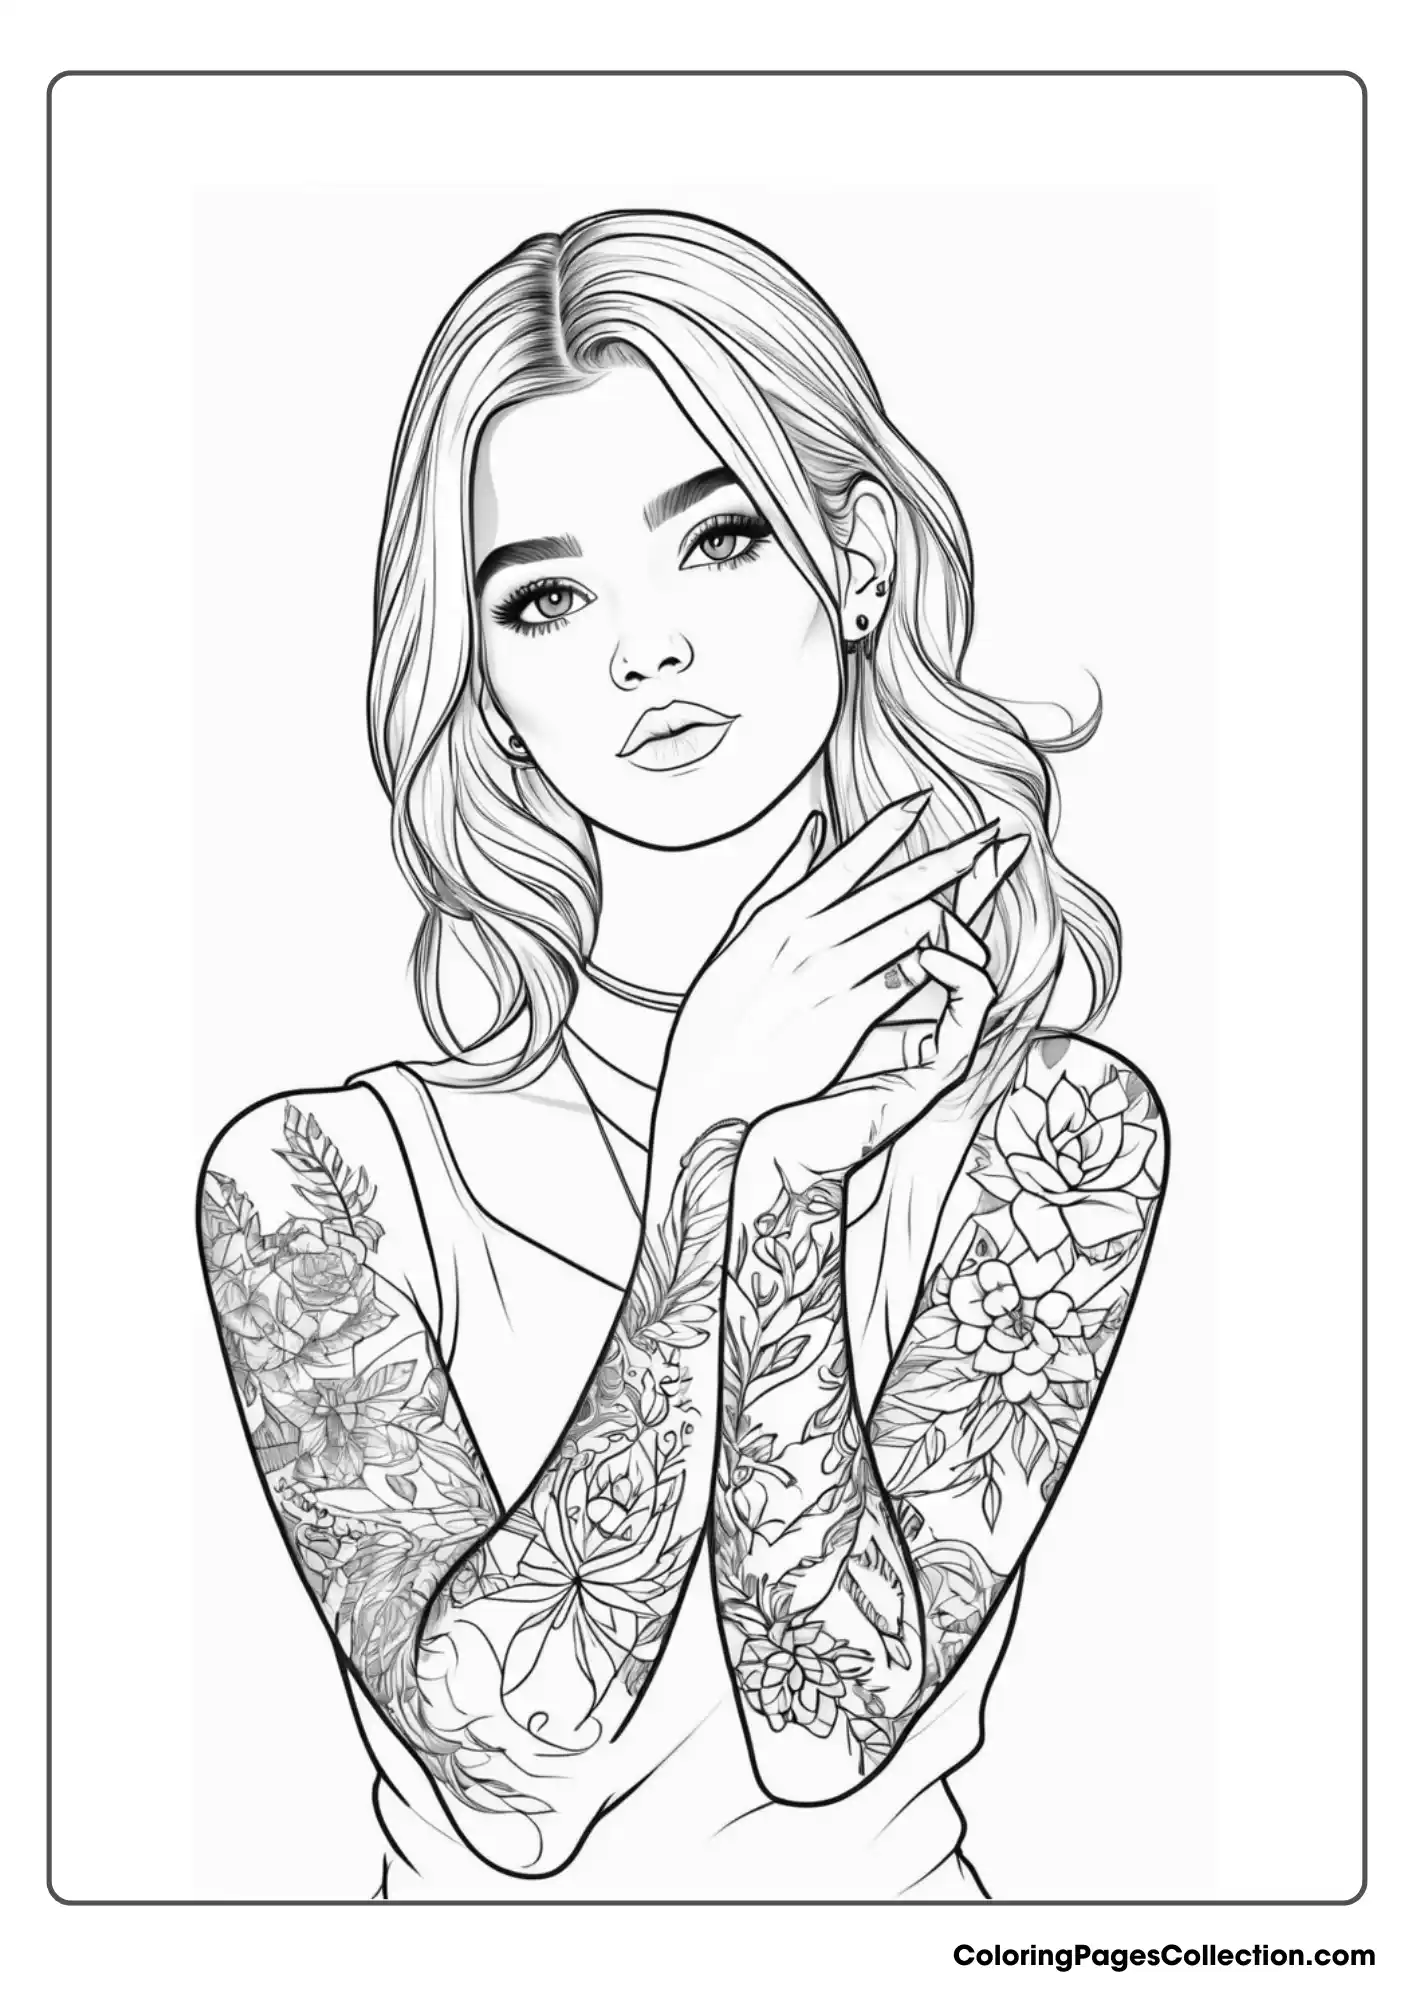 Coloring pages for teens, Realistic Girl with Tattoo on Her Both Hands